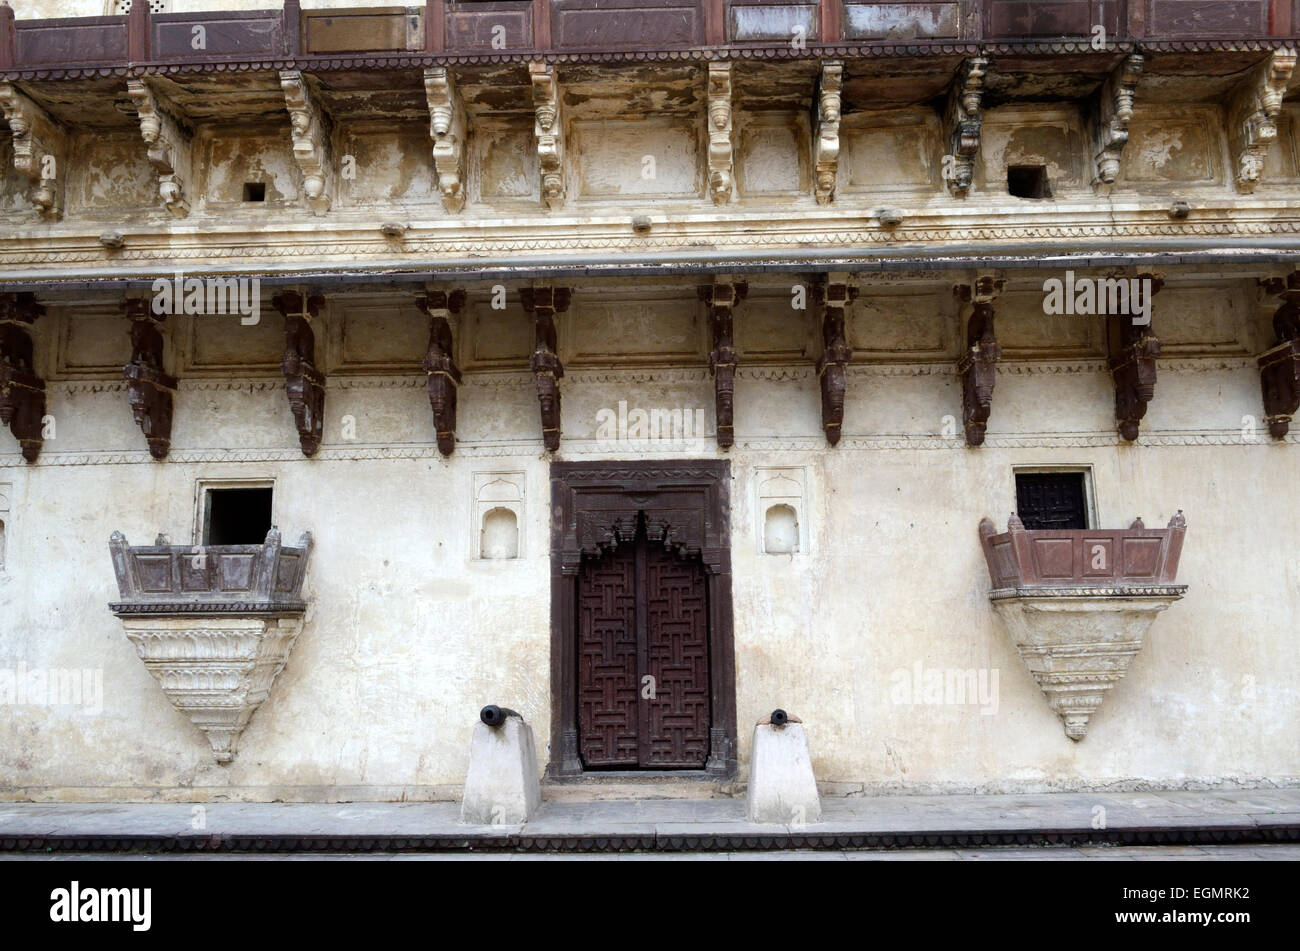 Canons in front of old  wooden door 17th century  Jahangir Palace Orchha Madhya Pradesh India Stock Photo